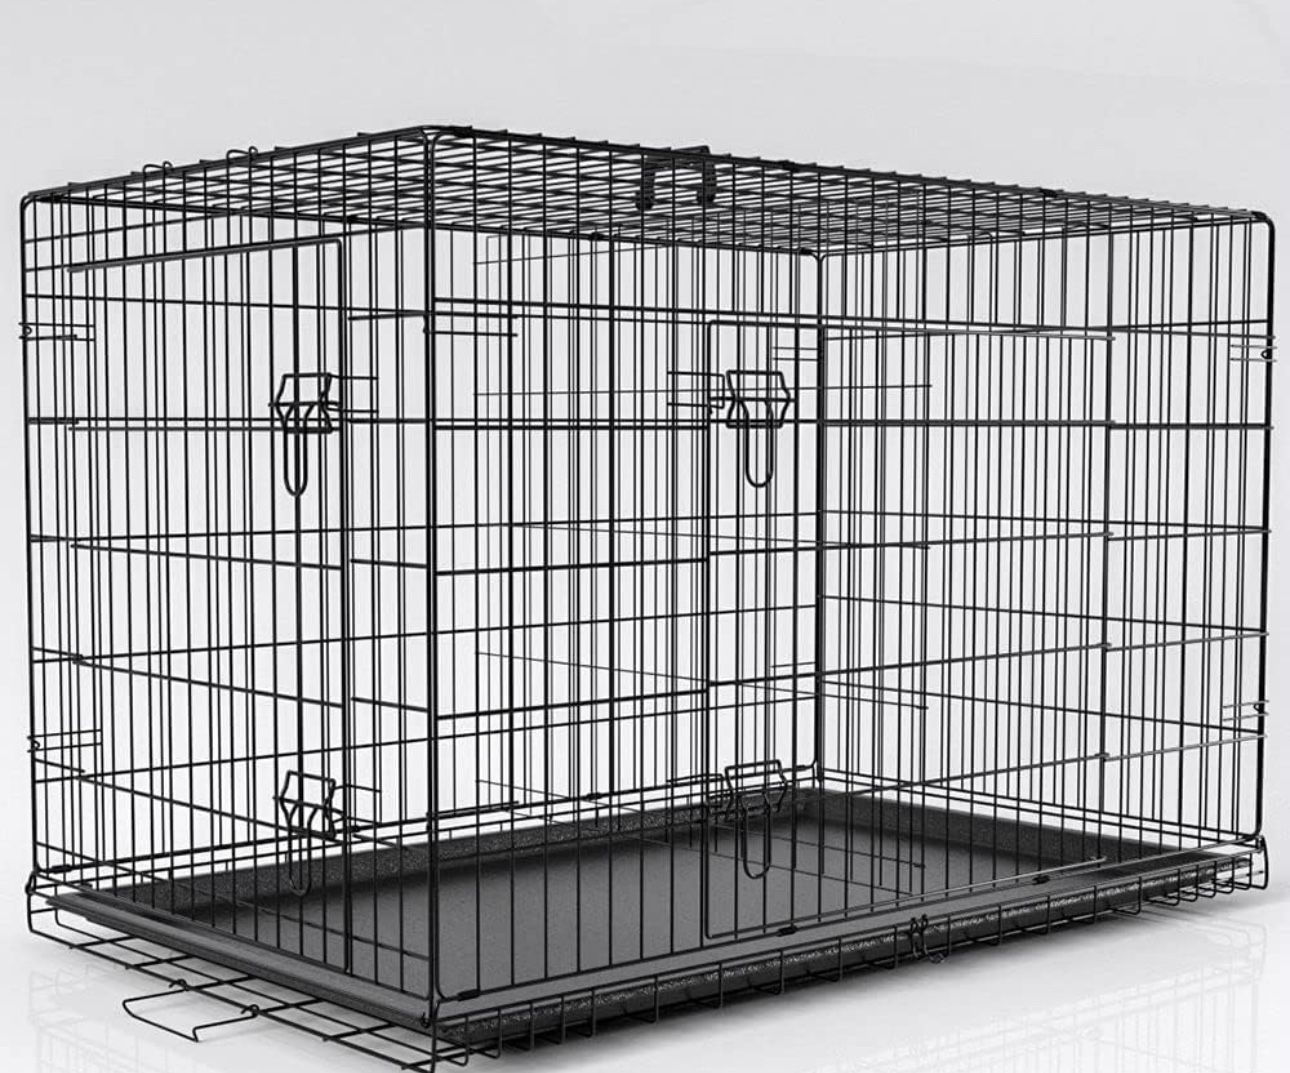 42” Dog Crate Extra Large From PetSmart Retail $220